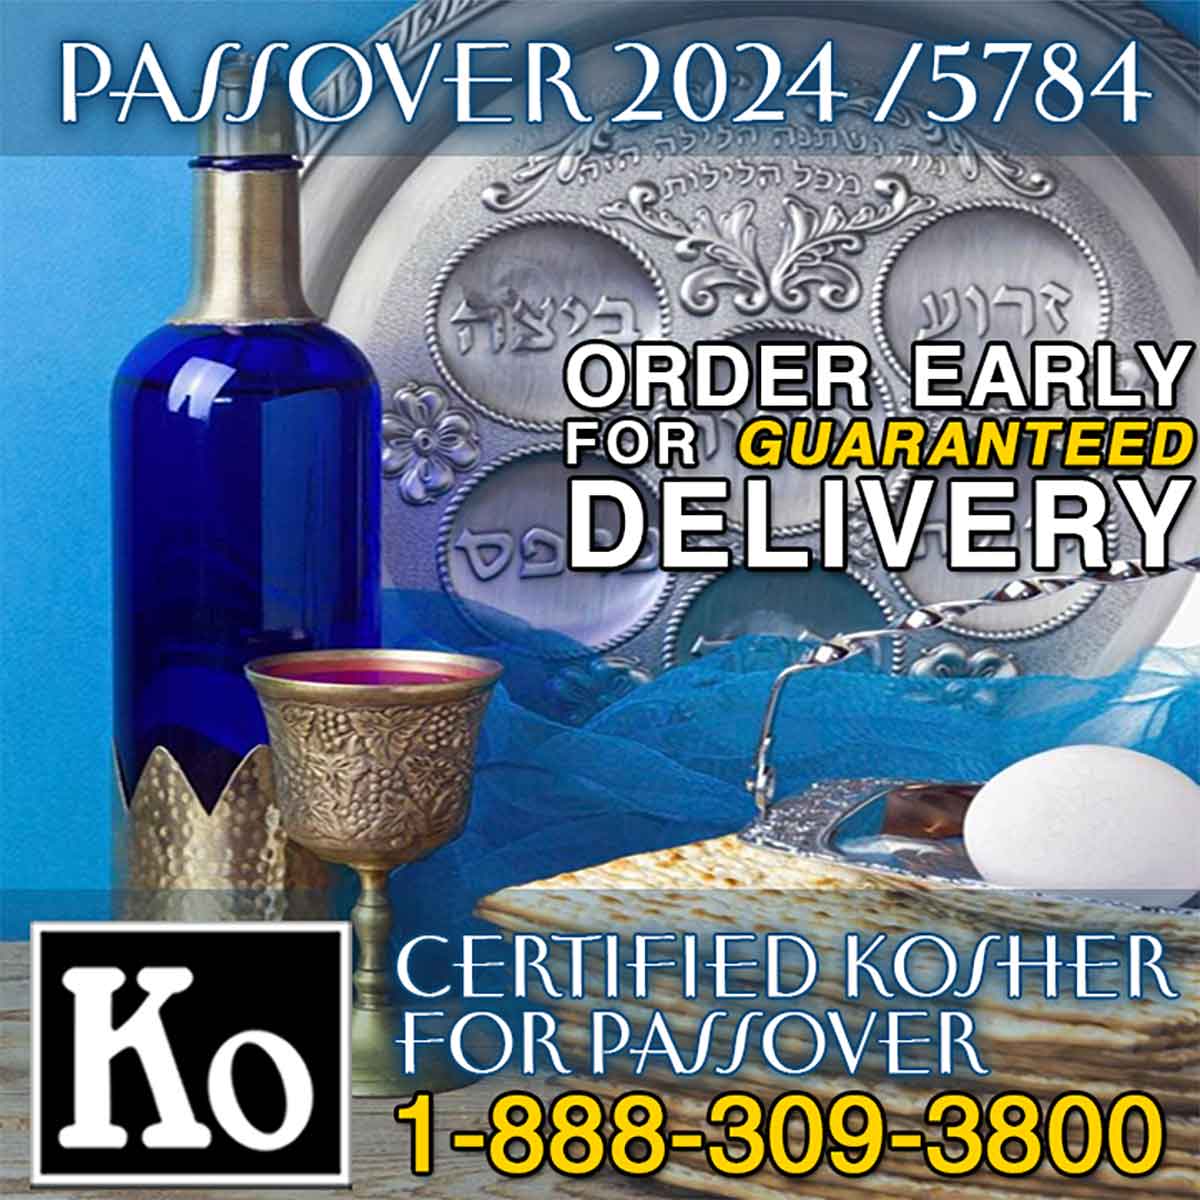 Hanukkah Kosher Catering, Certified Kosher Caterers by Panache Catering by Foodarama with delivery to Princeton New Jersey, Mainline, Delaware County and the Philadelphia Metropolitan Area including Bucks Country, Burlington County New Jersey and  Montgomery County Pennsylvania